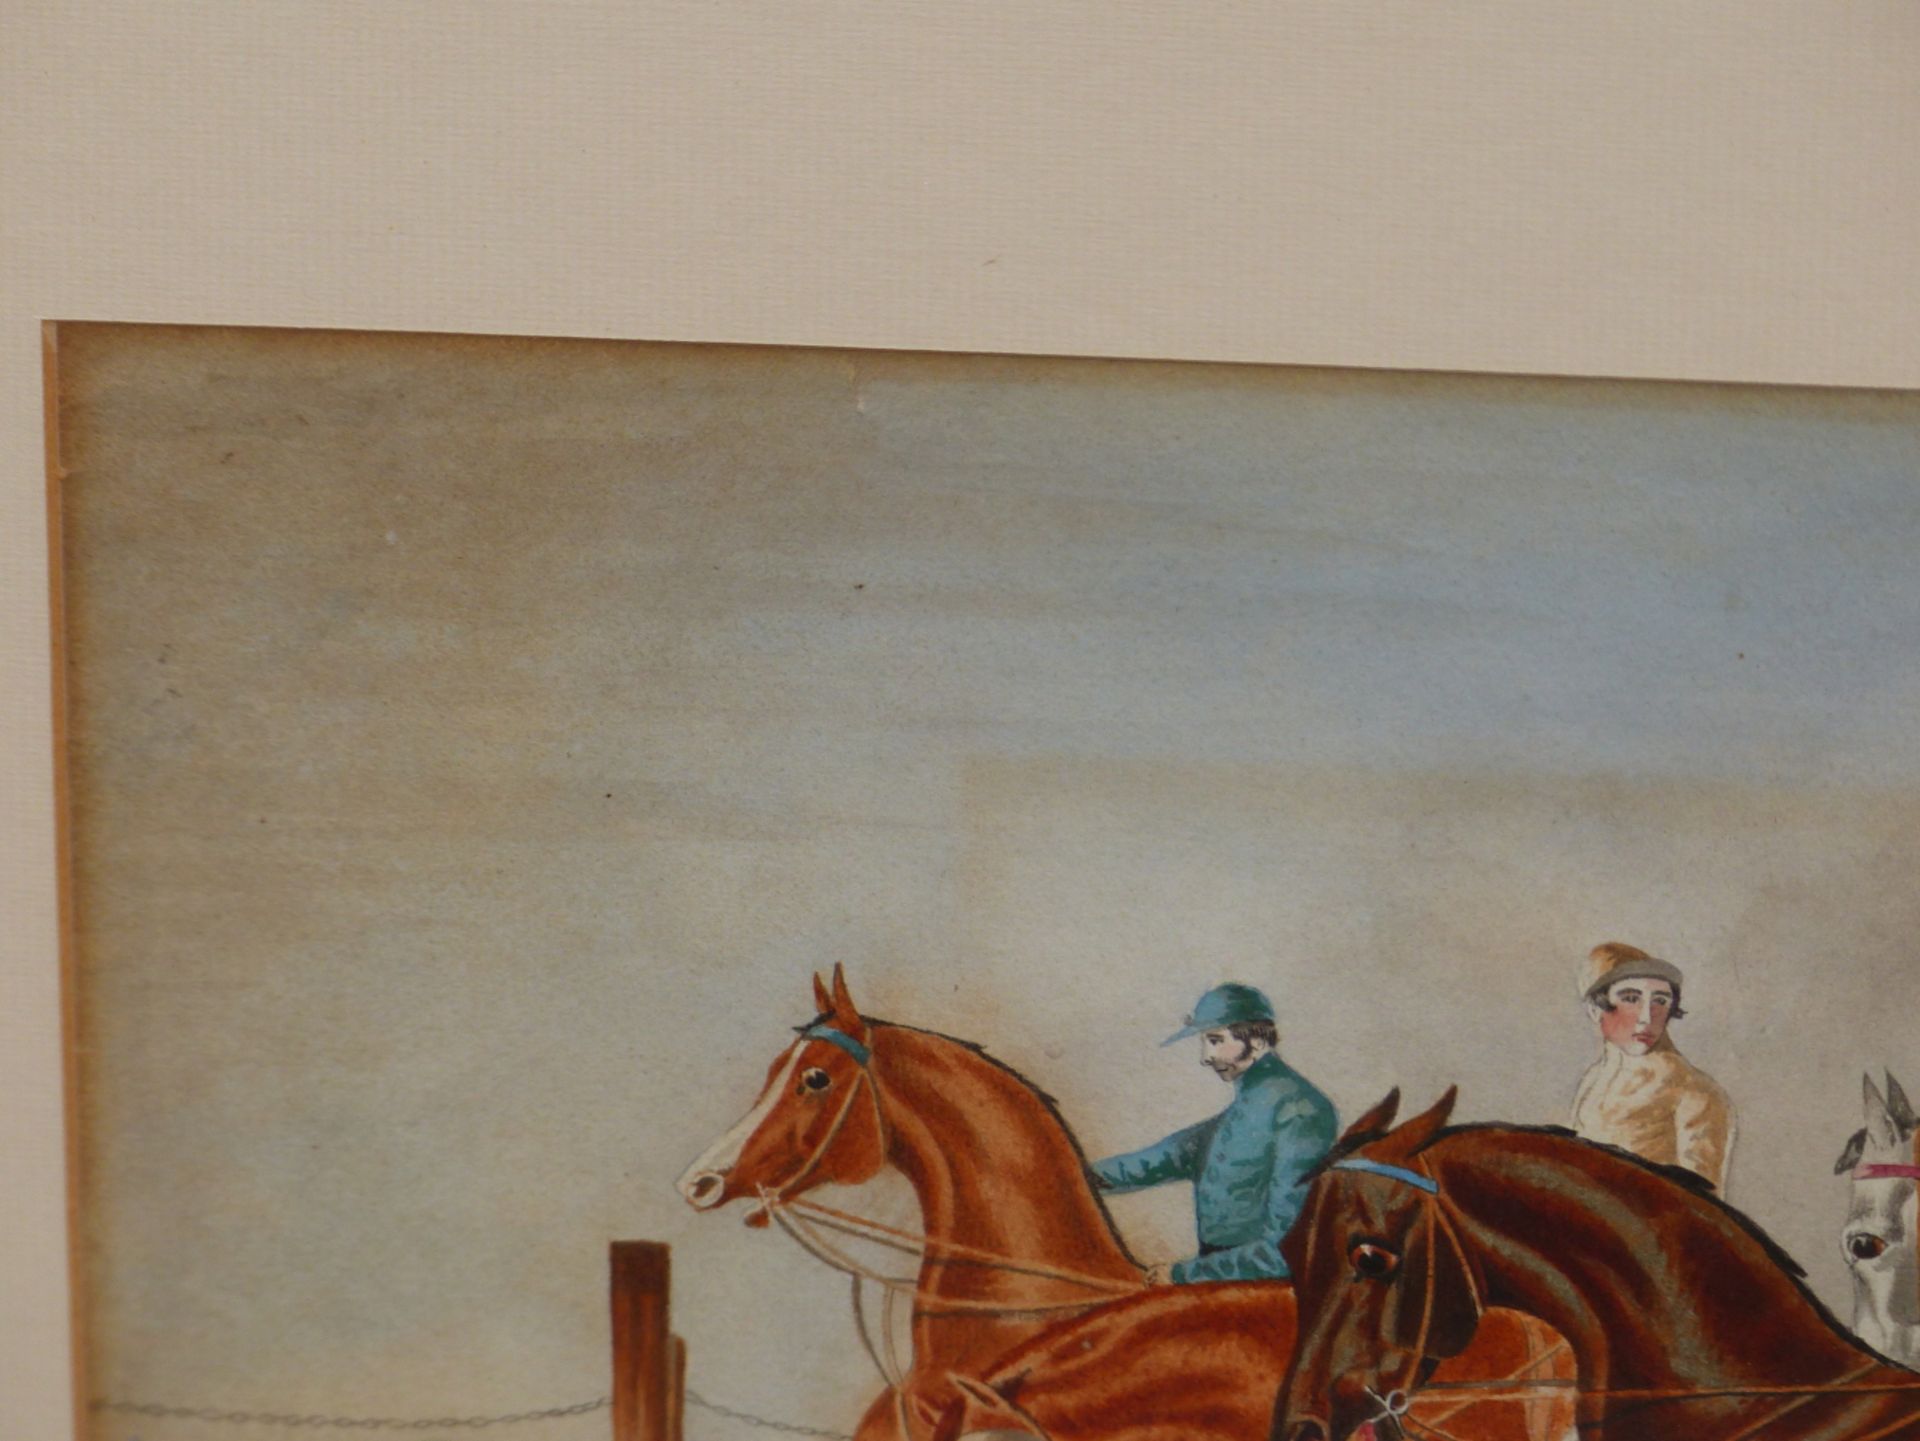 19th C. ENGLISH SCHOOL DANIEL O'ROUKE WINNING HE DERBY 1852, REPUTEDLY BY JAMES G. NOBLE, - Image 21 of 26